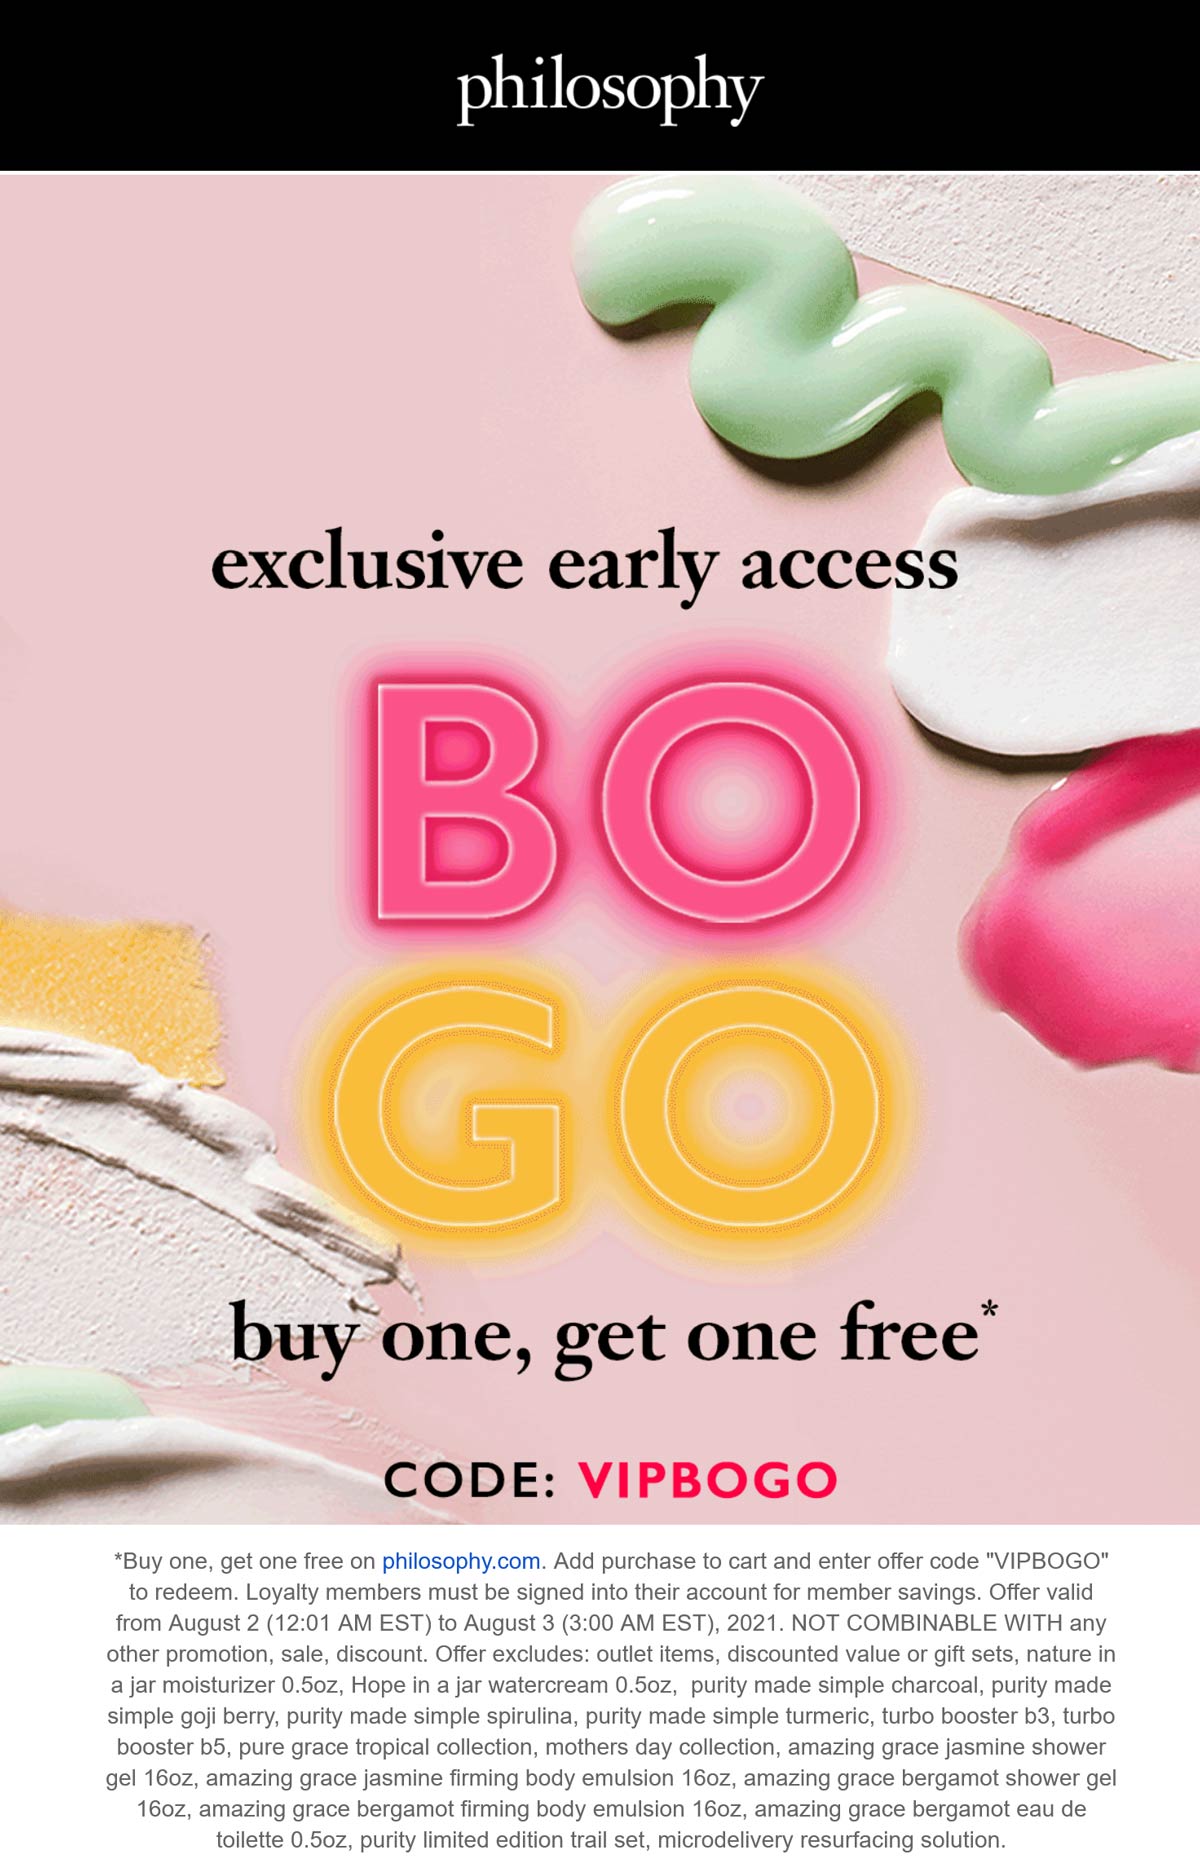 Philosophy stores Coupon  Second item free today online at Philosophy via promo code VIPBOGO #philosophy 